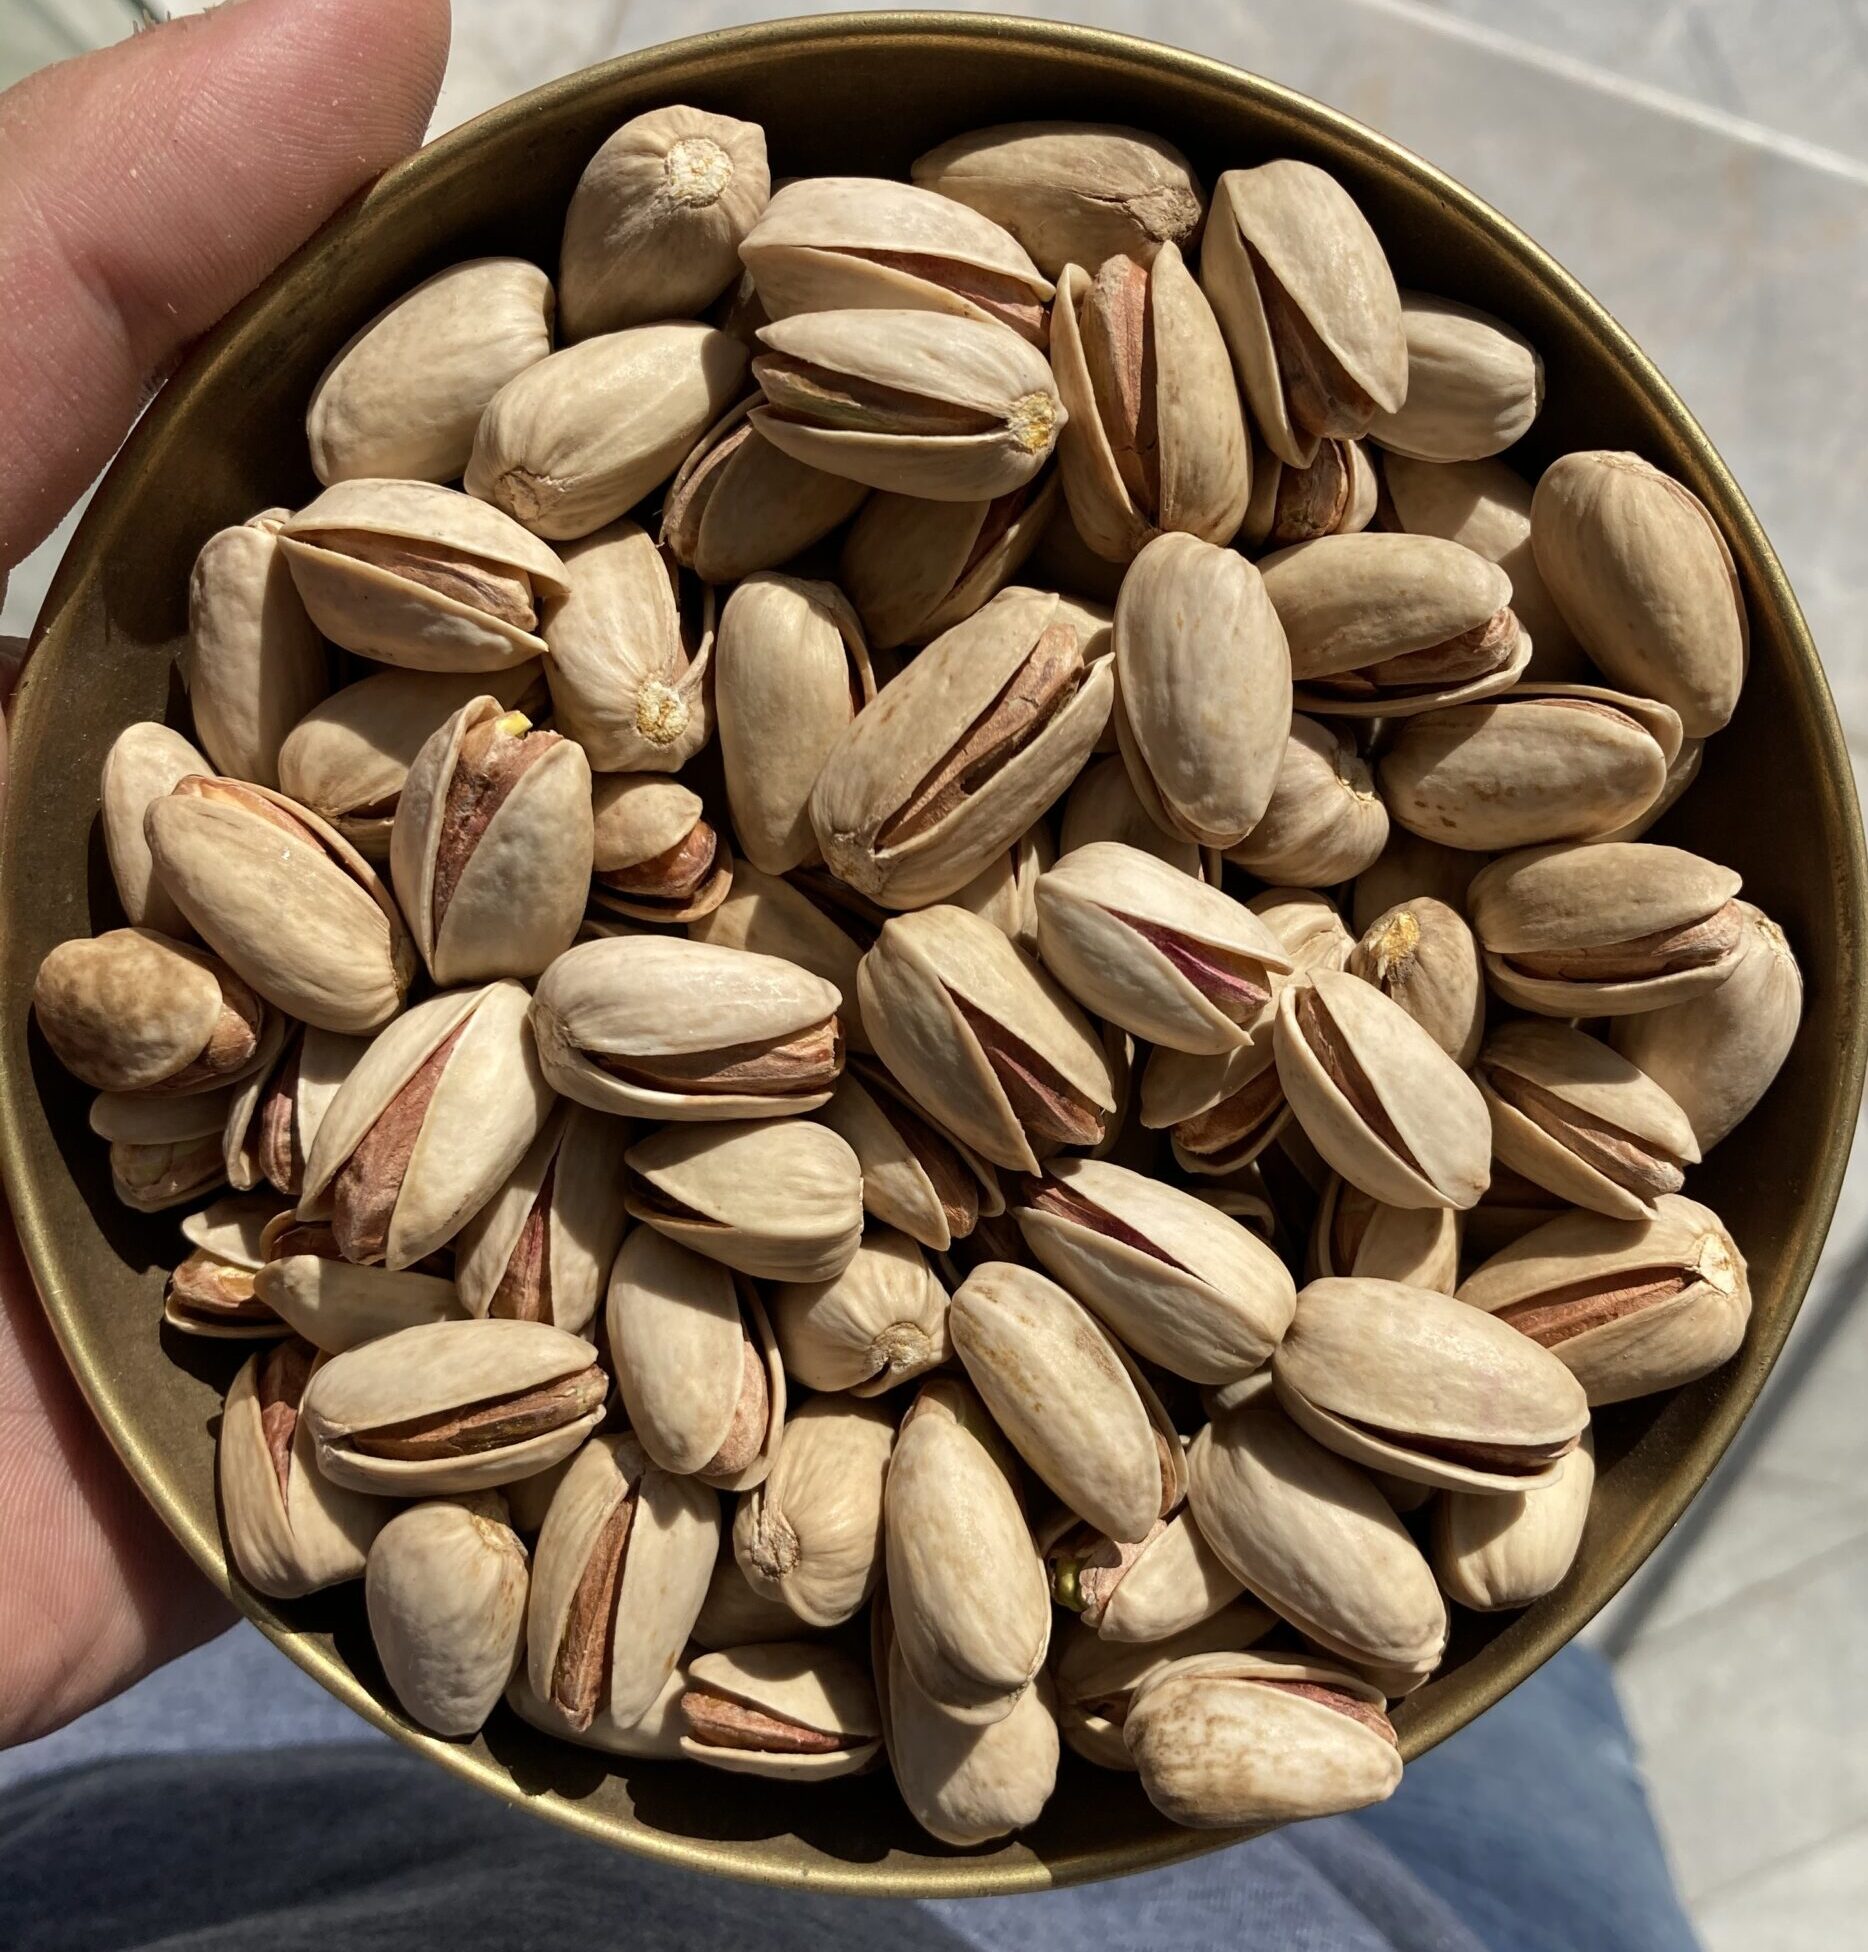 Supply of Iranian exported pistachios in 2021